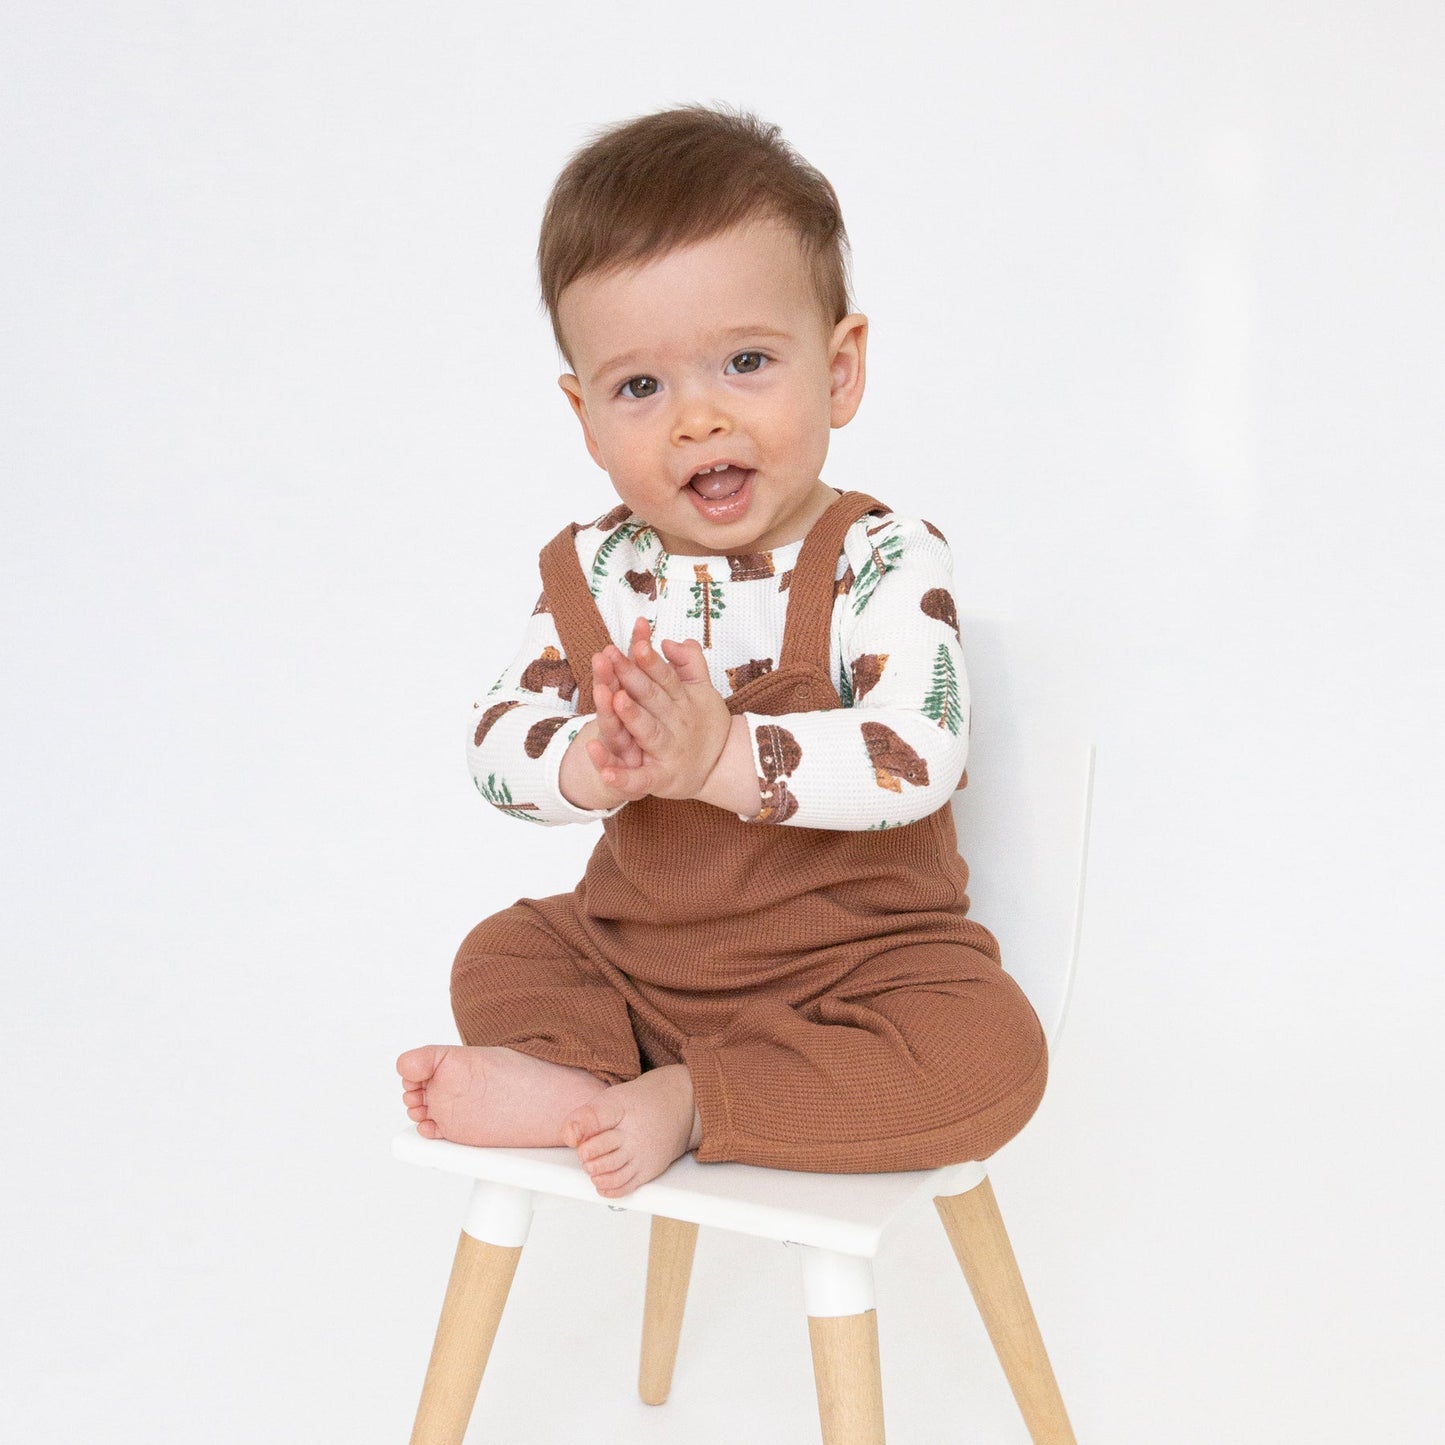 Brown Waffle Overalls: Peacan